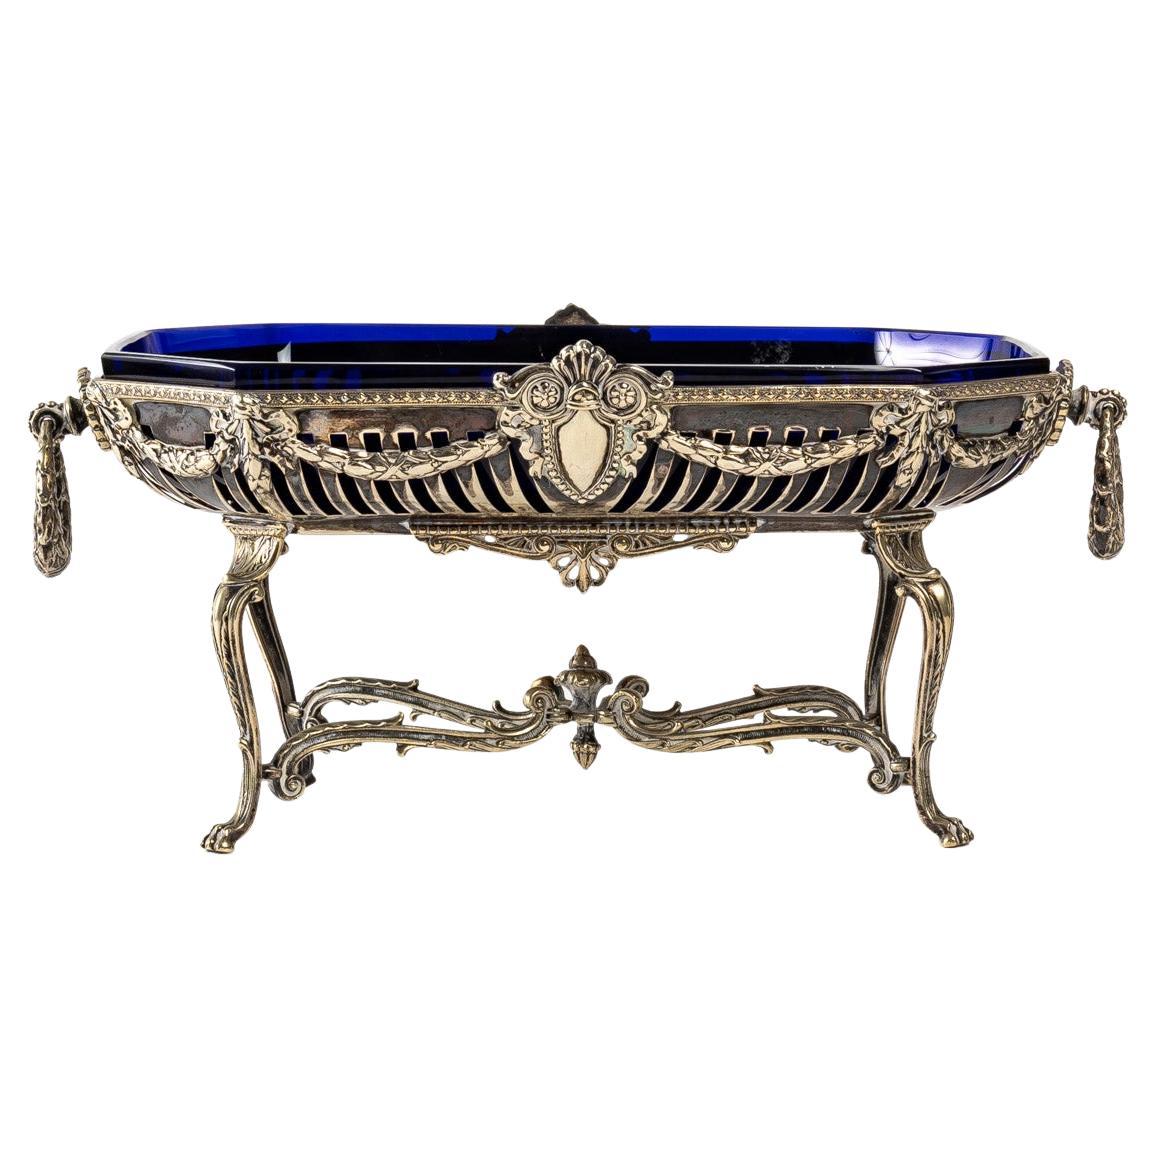 Bohemian Crystal and Silver Plated Metal Bowl, 19th Century